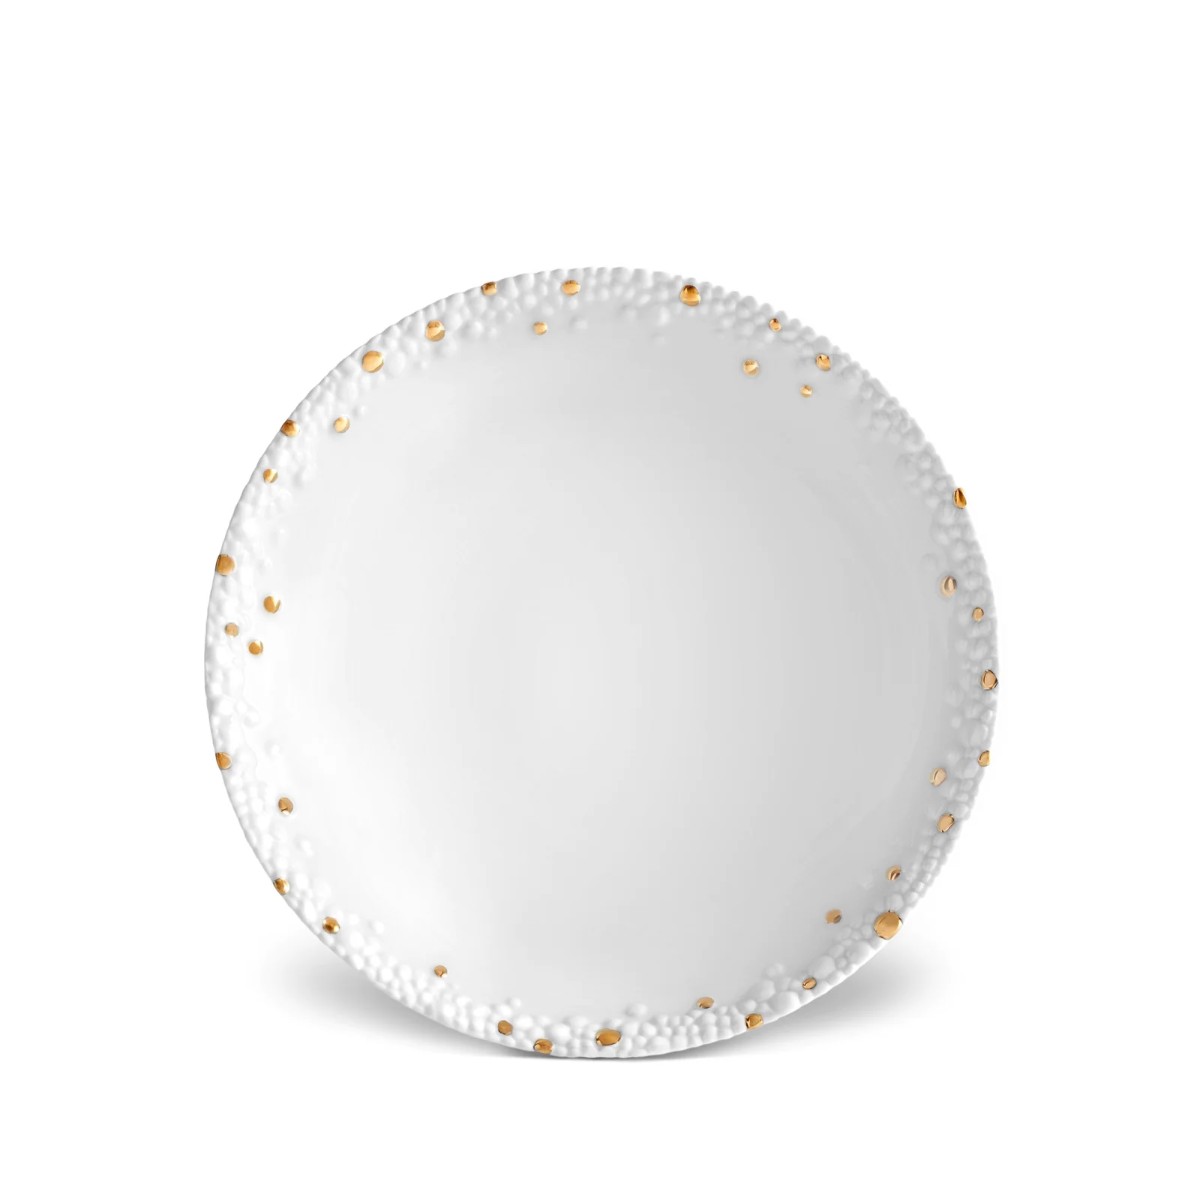 L’Objet | Haas Mojave Soup Plate | White and Gold